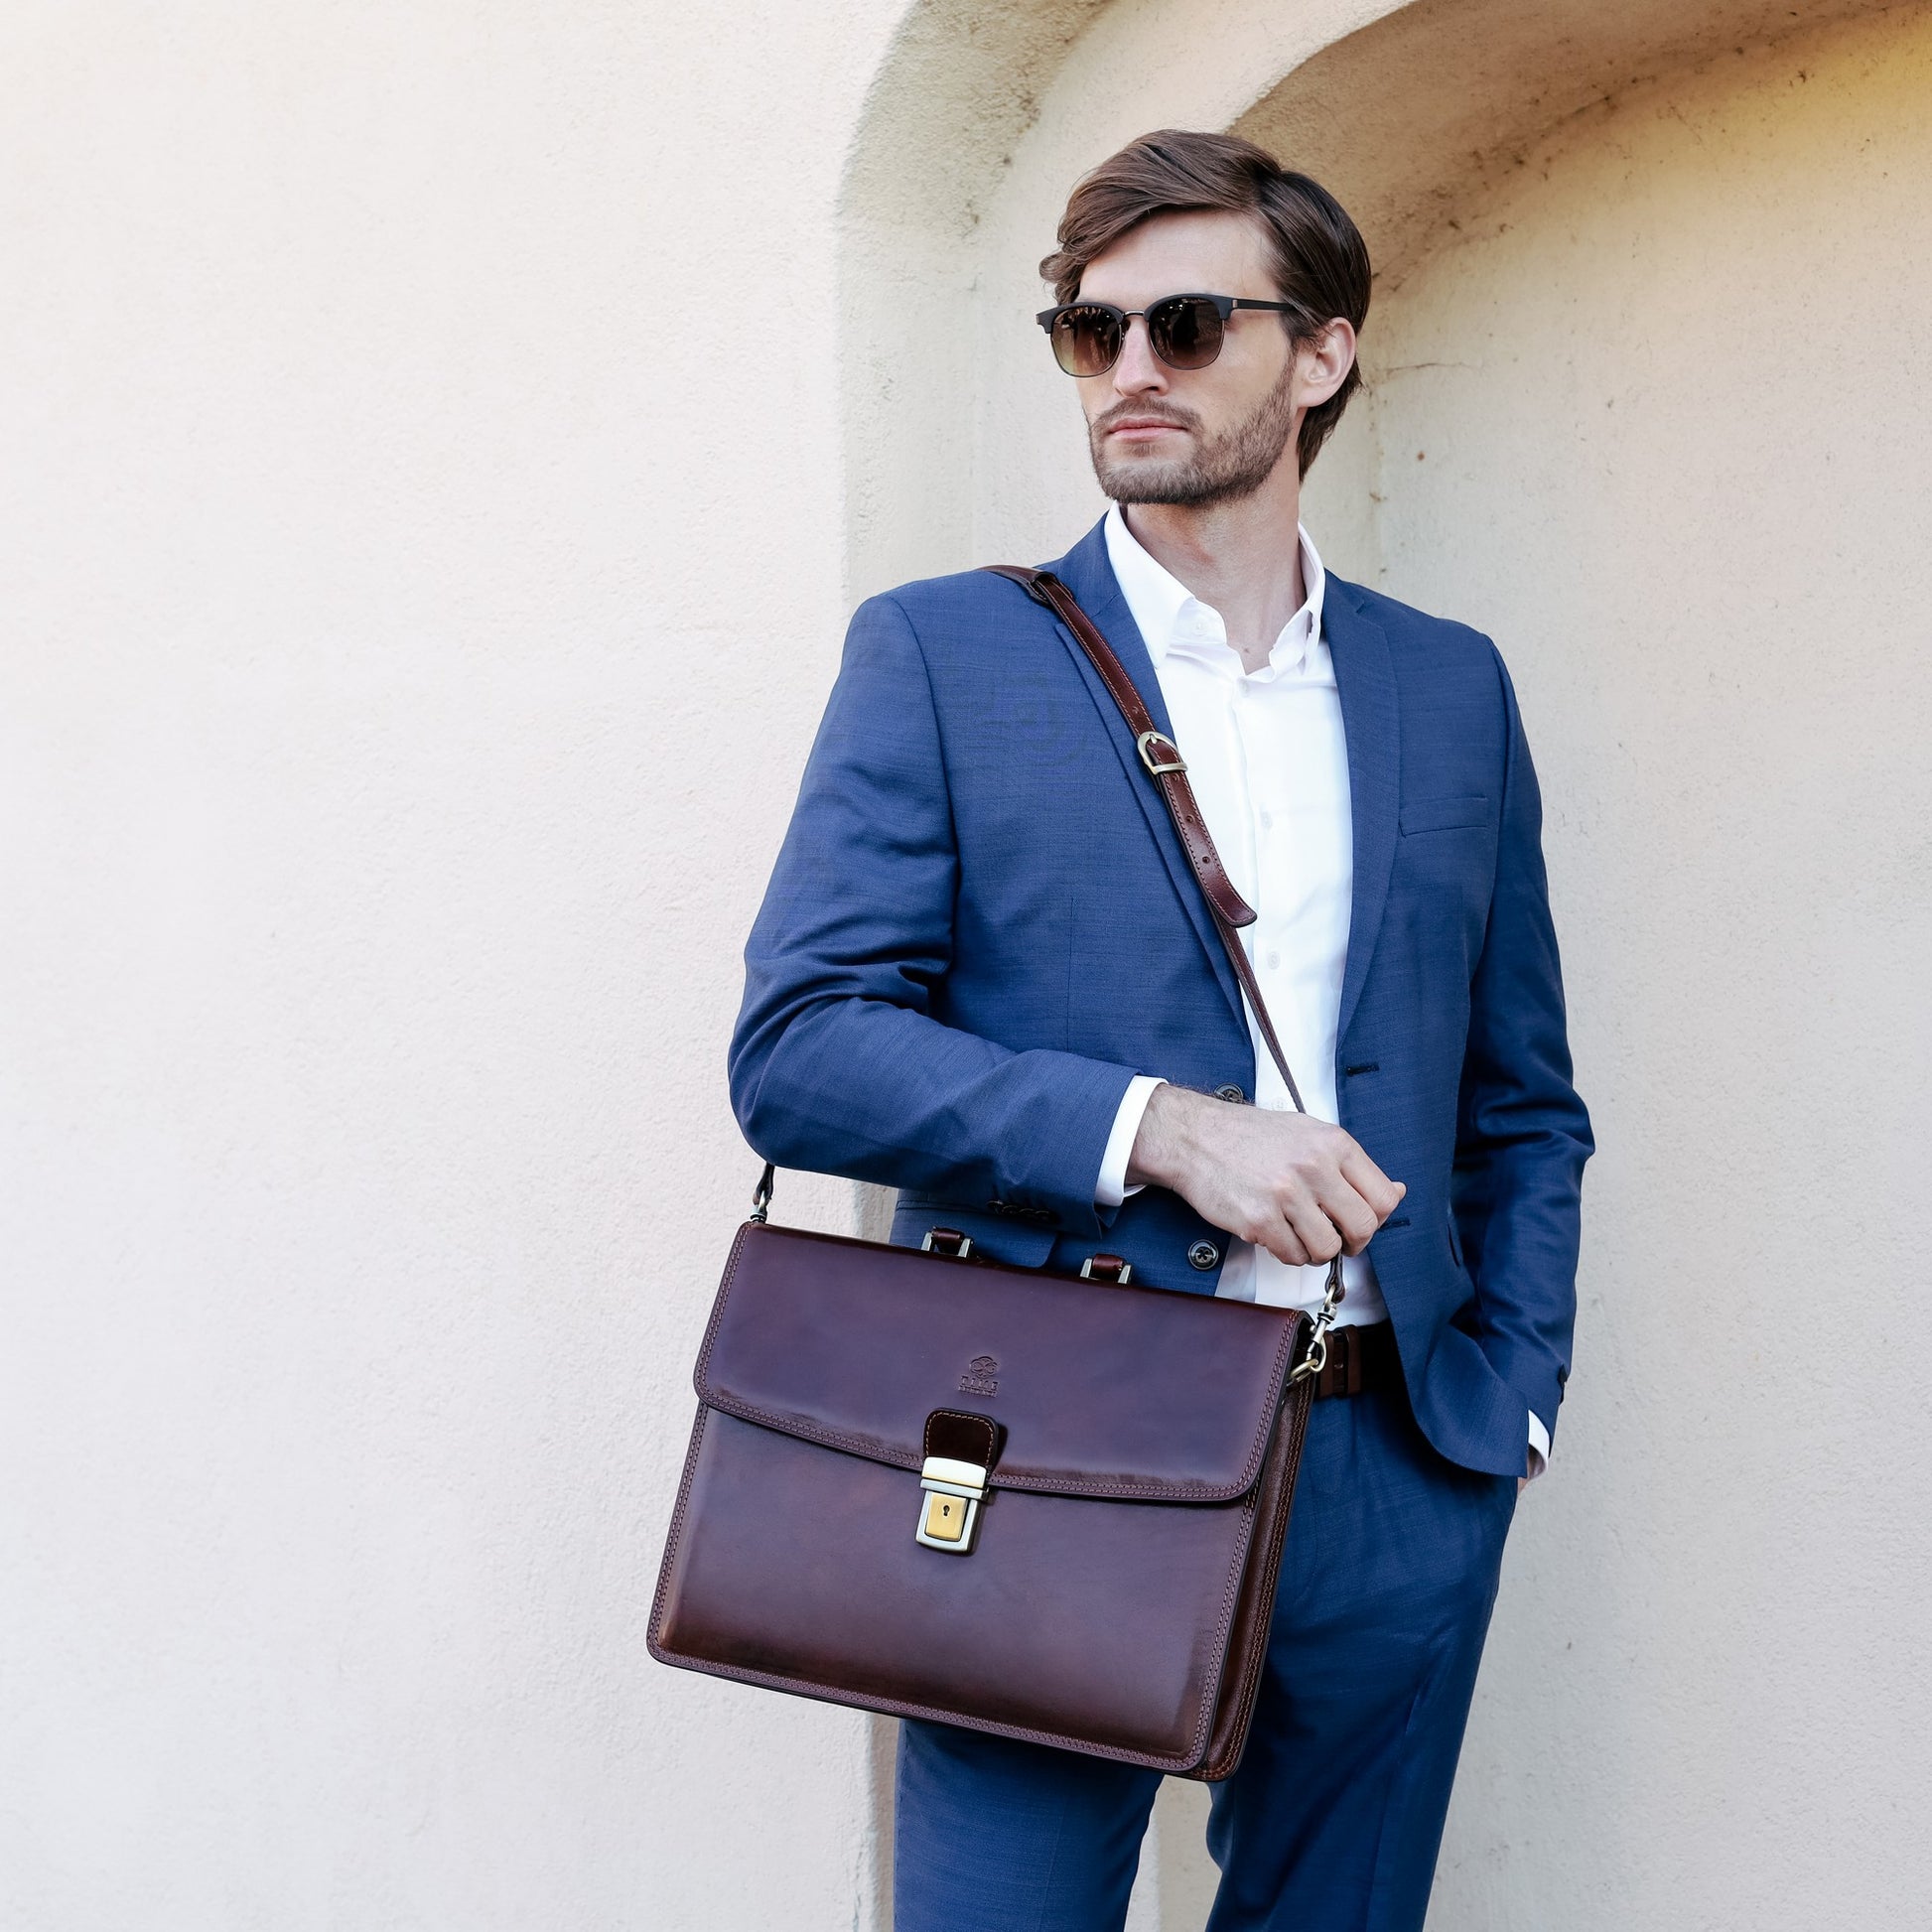 Leather Briefcase - The Sound of the Mountain Briefcase Time Resistance   